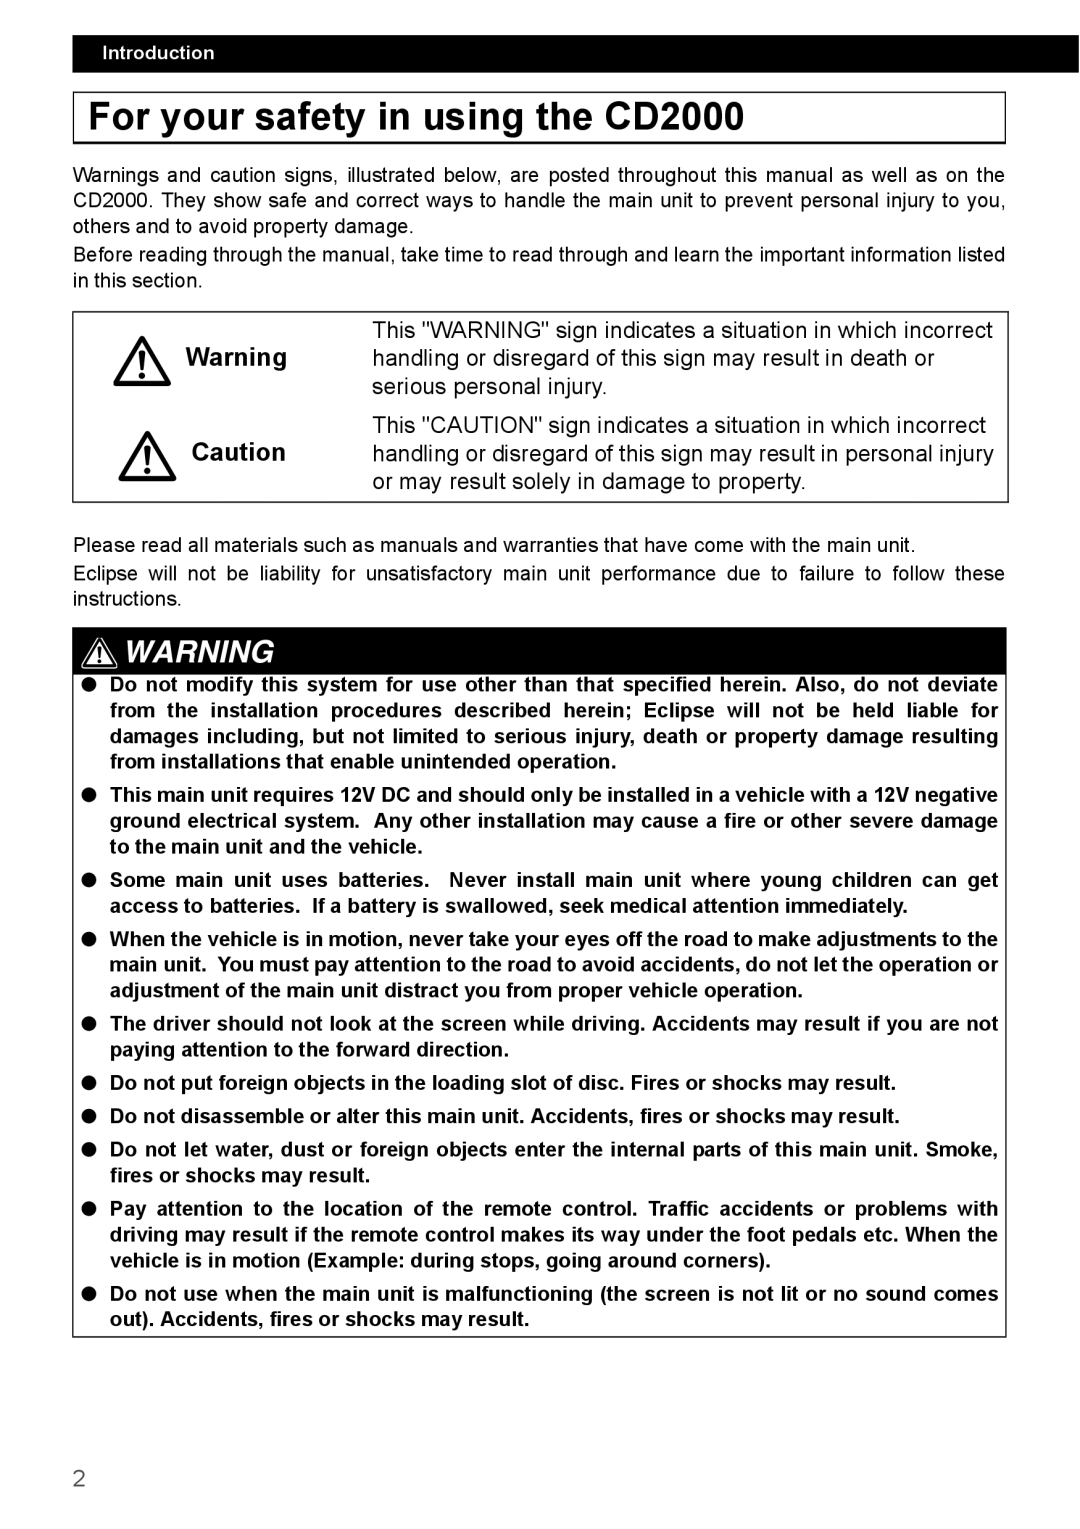 Eclipse - Fujitsu Ten For your safety in using the CD2000, This WARNING sign indicates a situation in which incorrect 